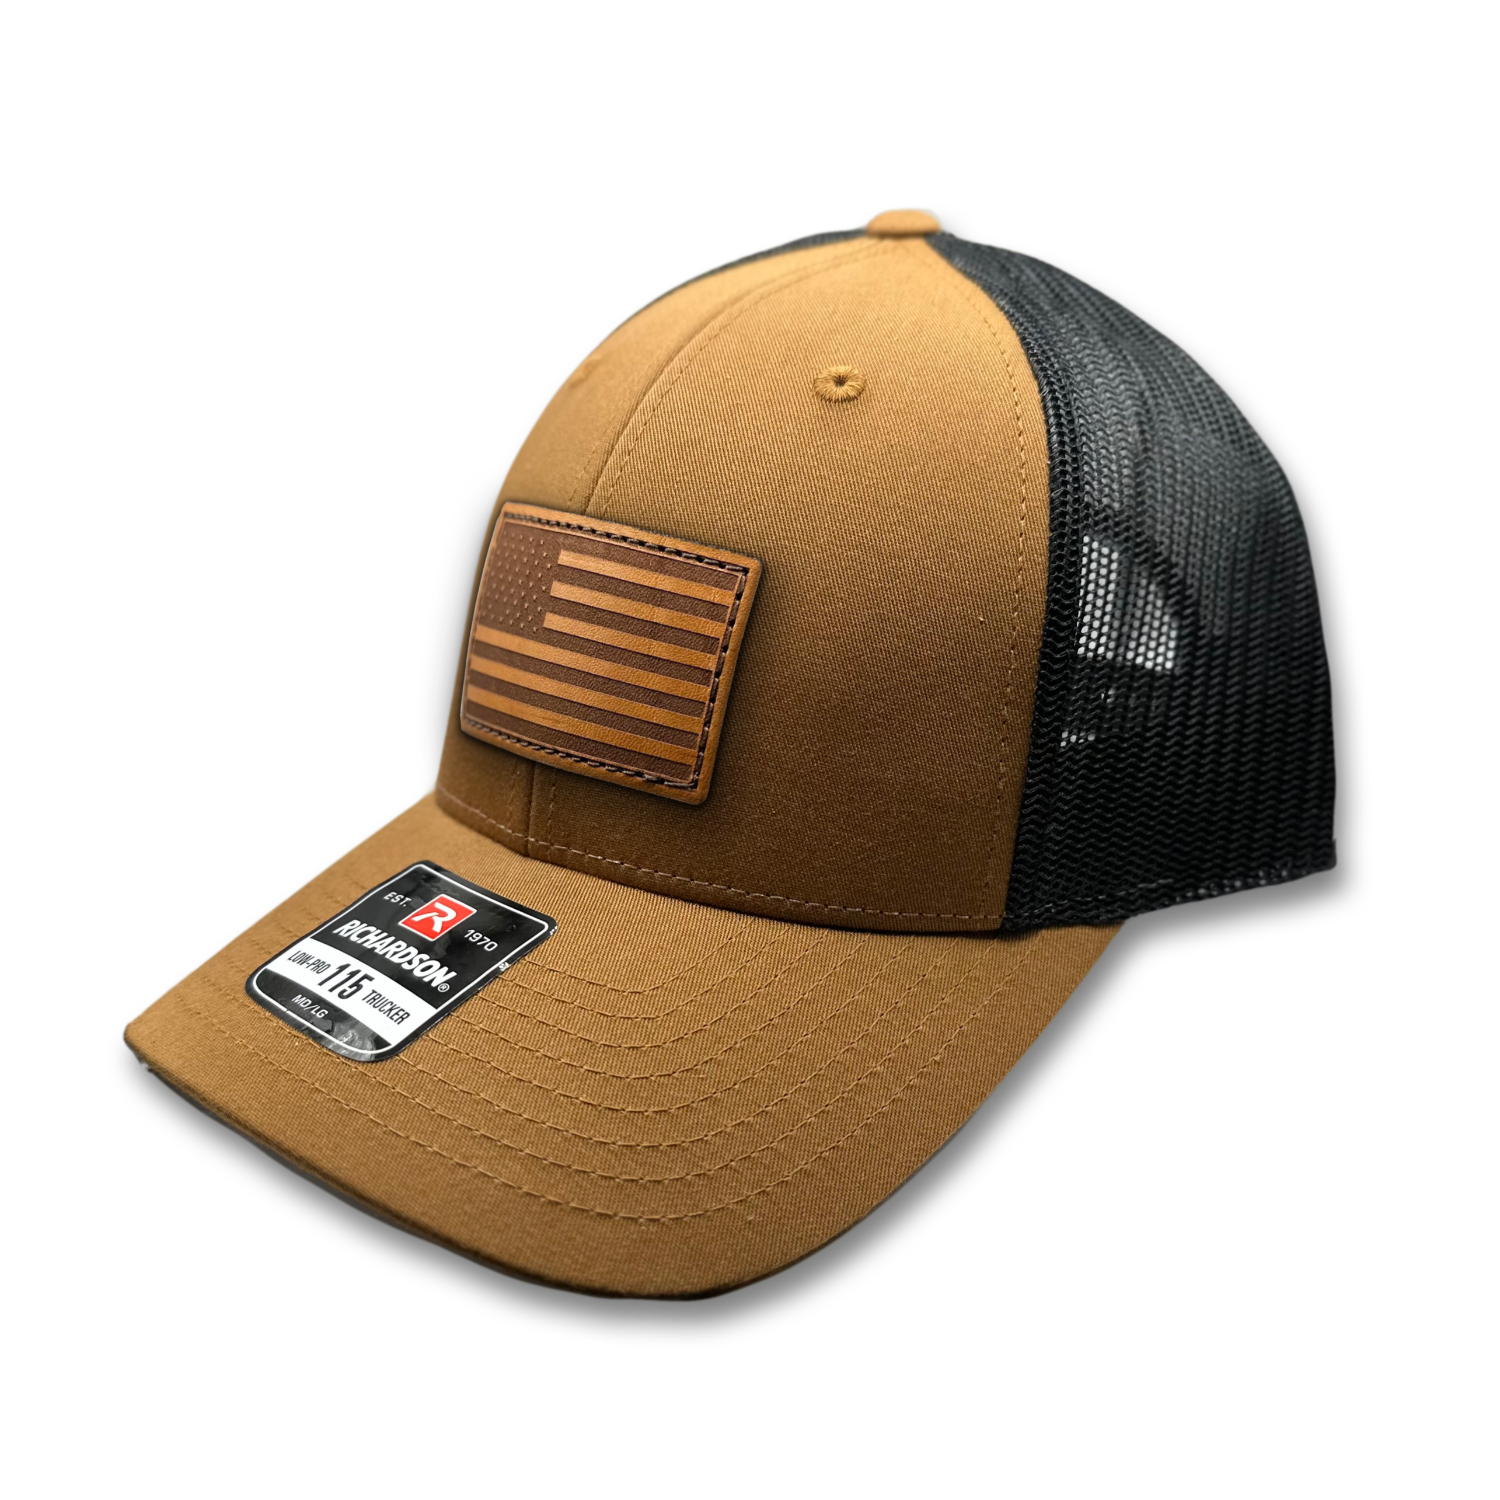 Image of a Carmel/Black Richardson 115 hat with a distinctive American flag patch crafted from genuine leather, laser engraved and securely sewn onto the hat. The hat features a fully adjustable snap back and is a low profile trucker style hat that can be adjusted to fit small or M/L sizes, offering a versatile and fashionable accessory for any occasion.